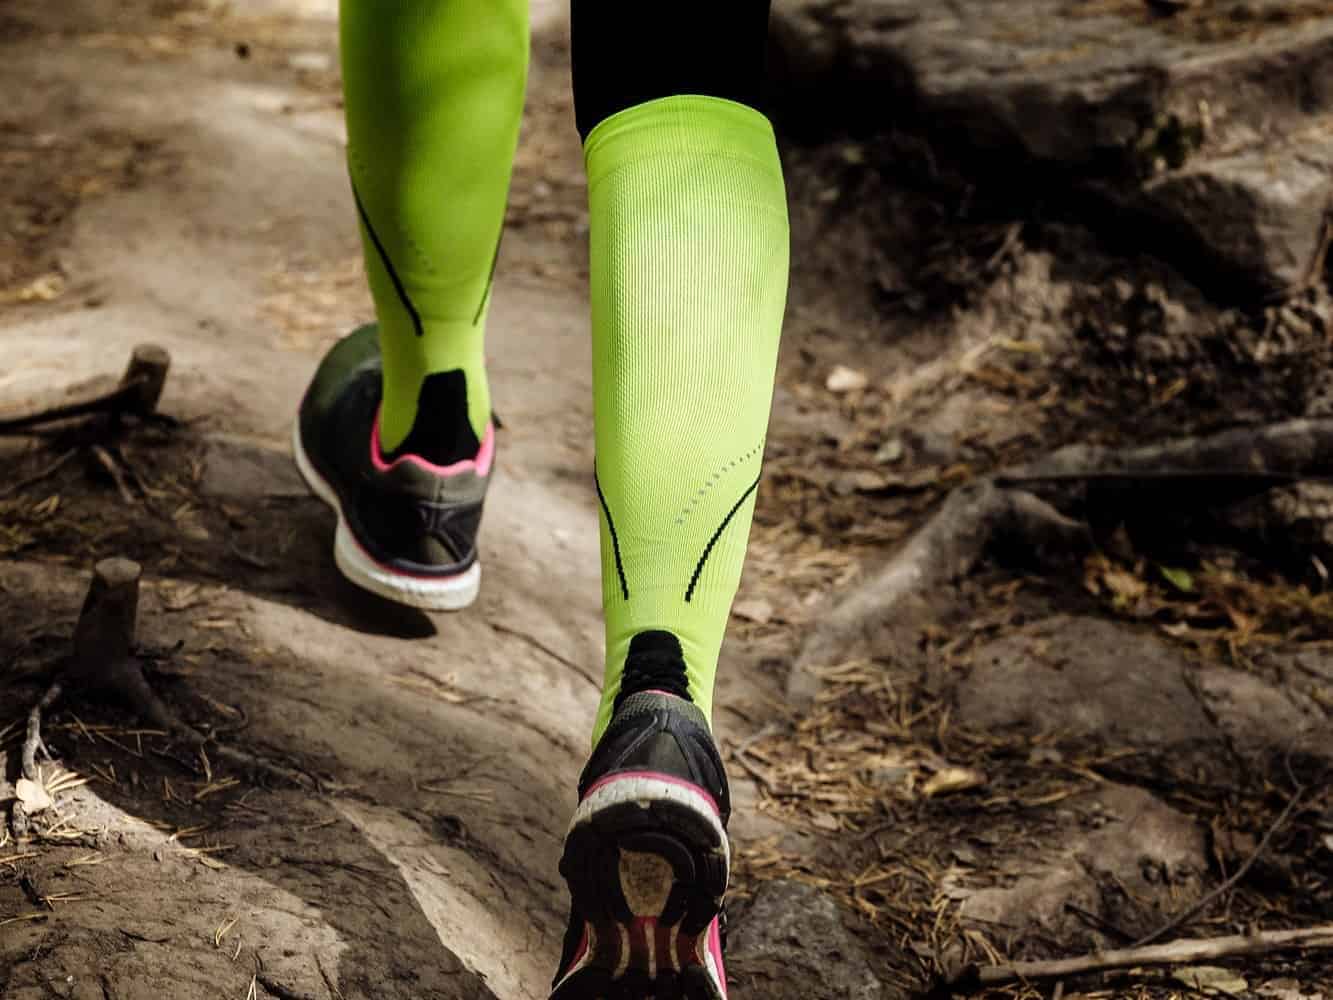 A woman's legs with compression socks on, running on a trail.